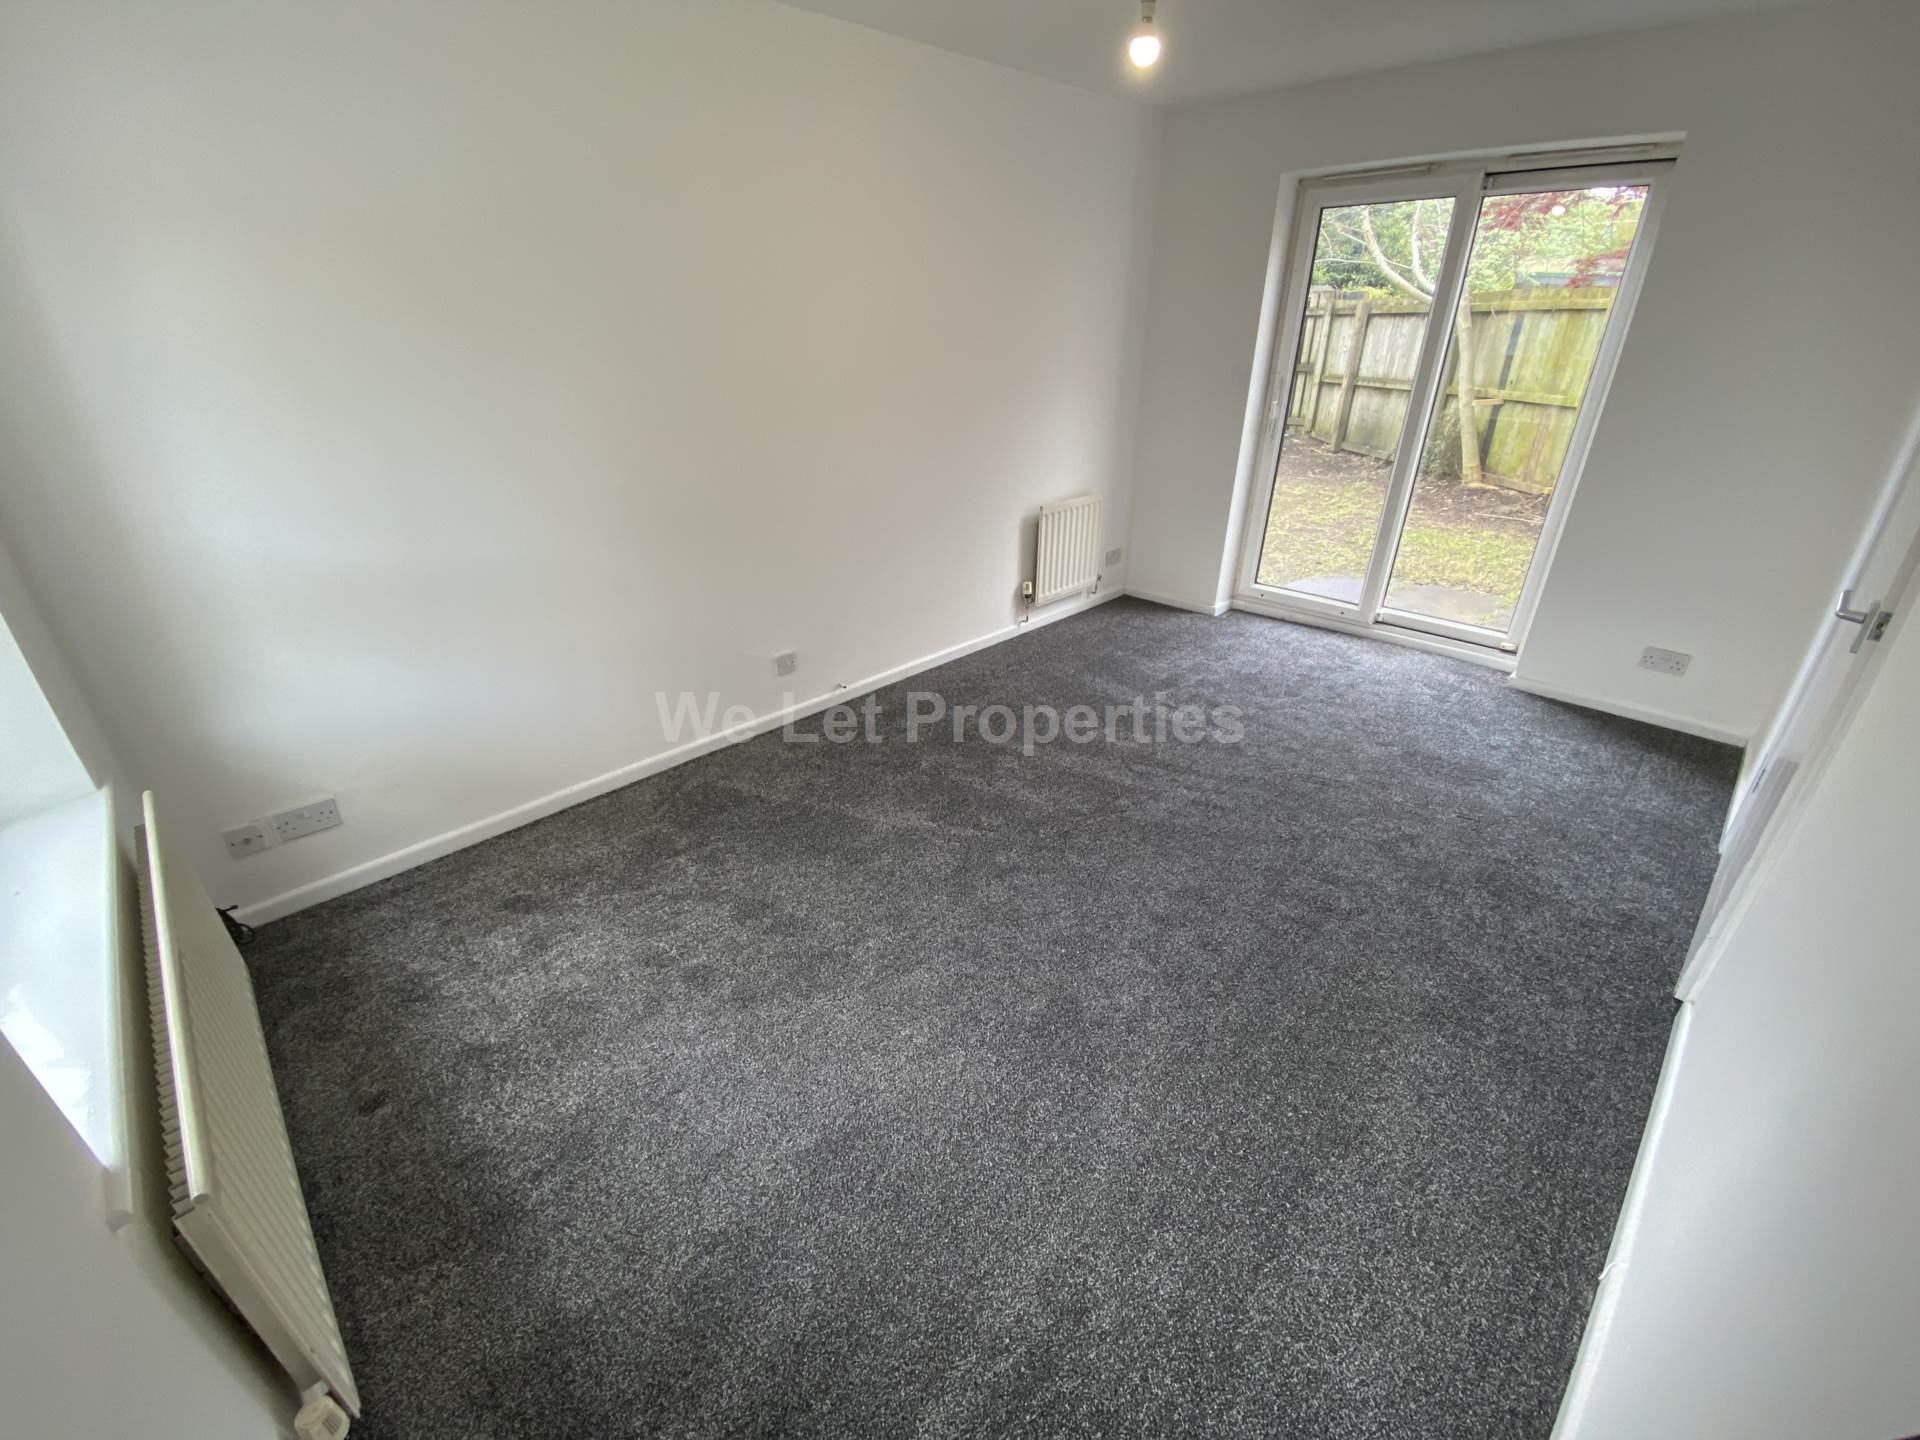 3 bed Apartment for rent in Manchester. From We Let Properties - Manchester